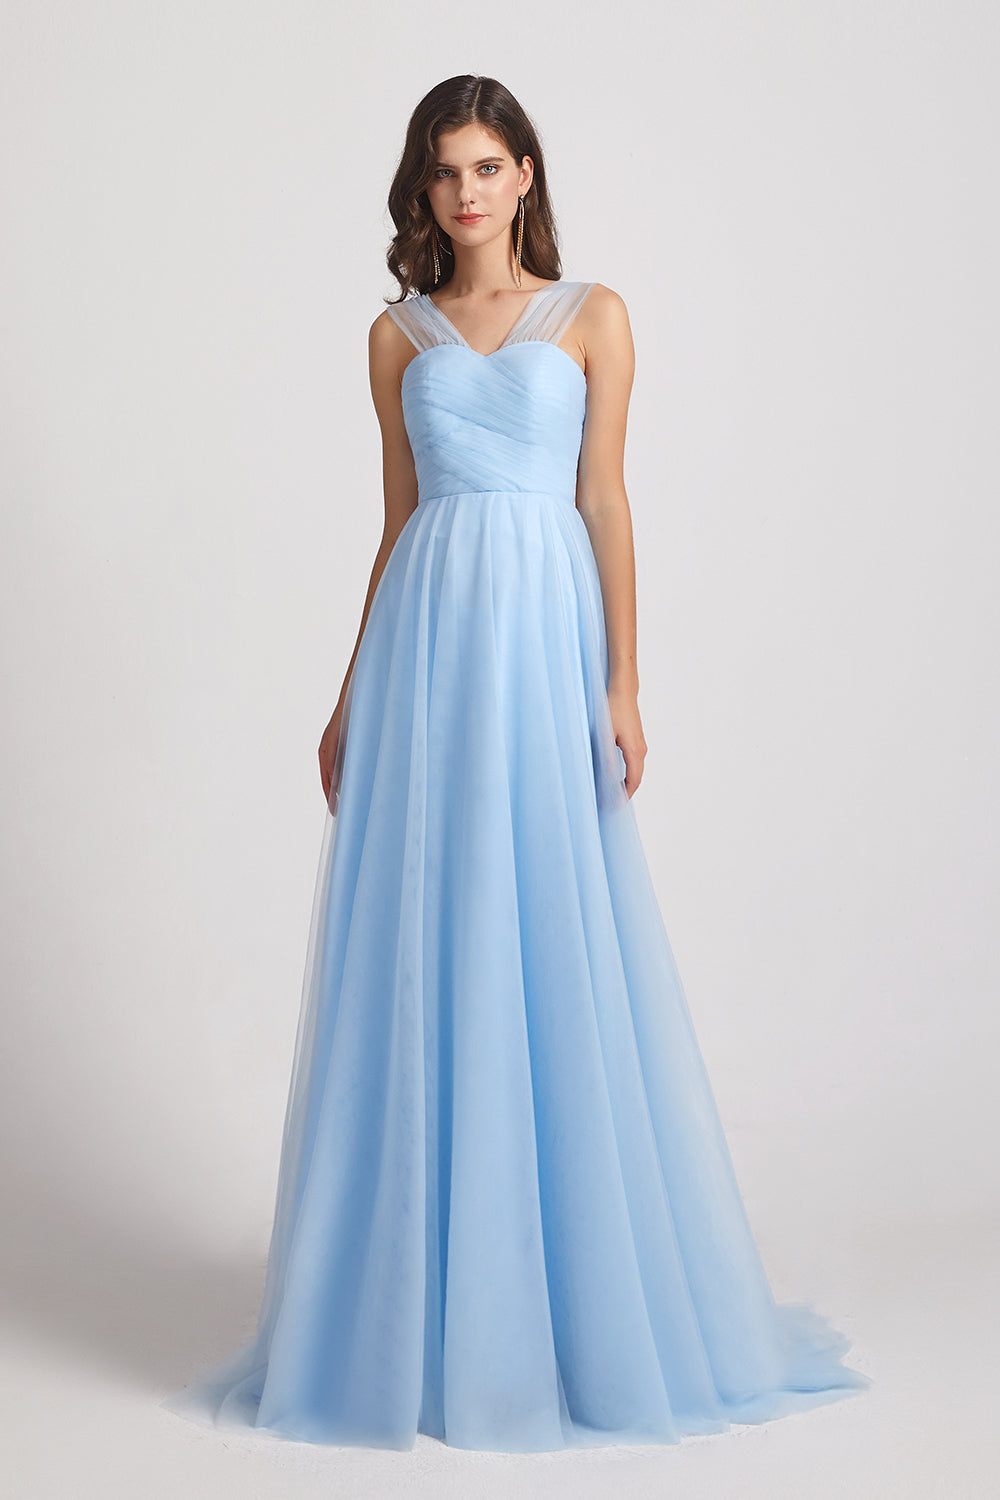 tulle convertible bridesmaid dresses